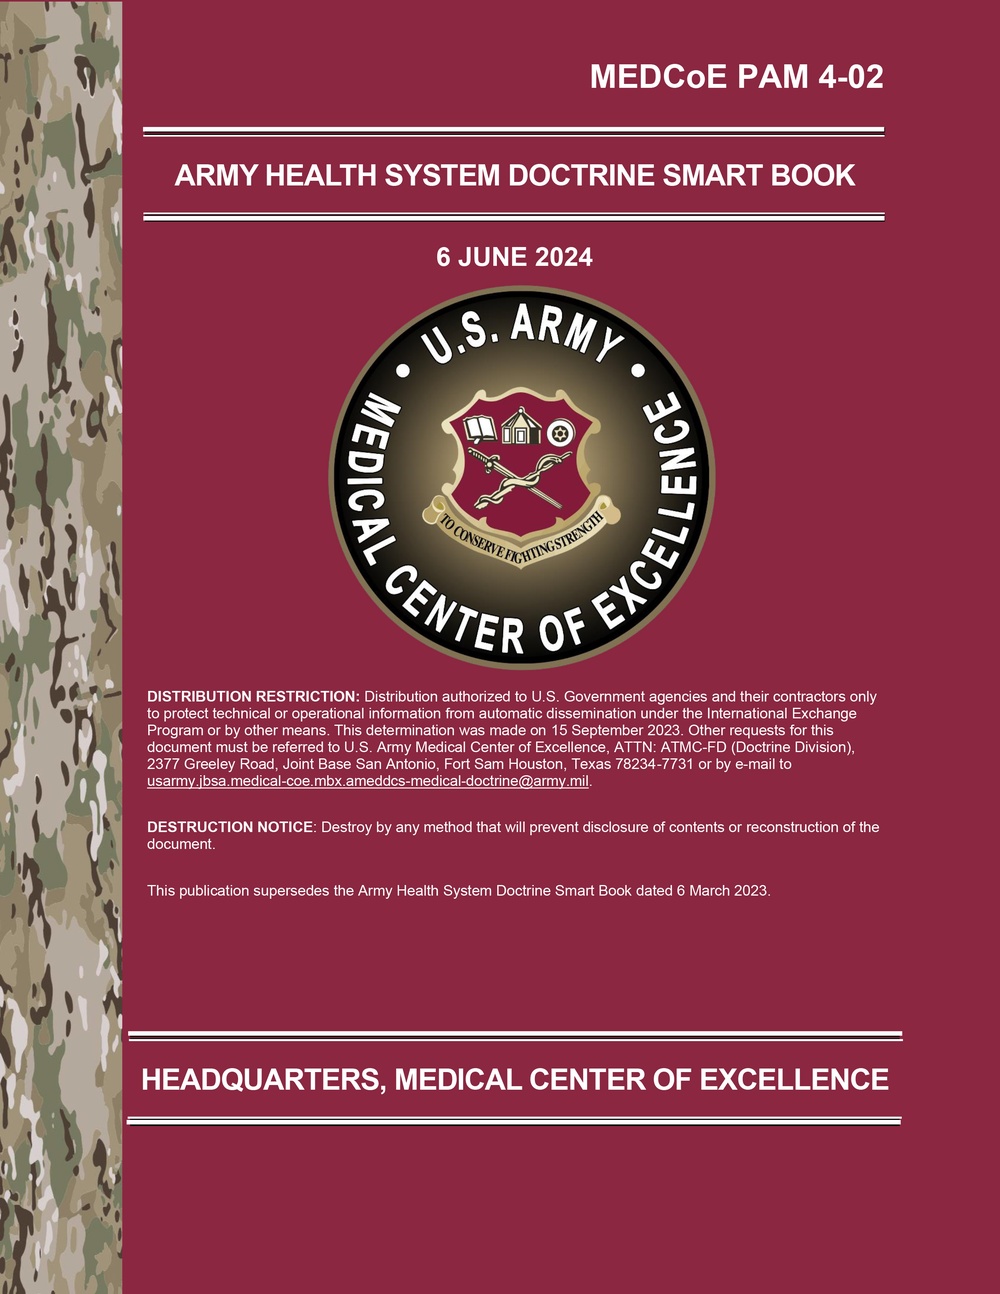 DVIDS – News – MEDCoE publishes Army Health System Doctrine Smart Book